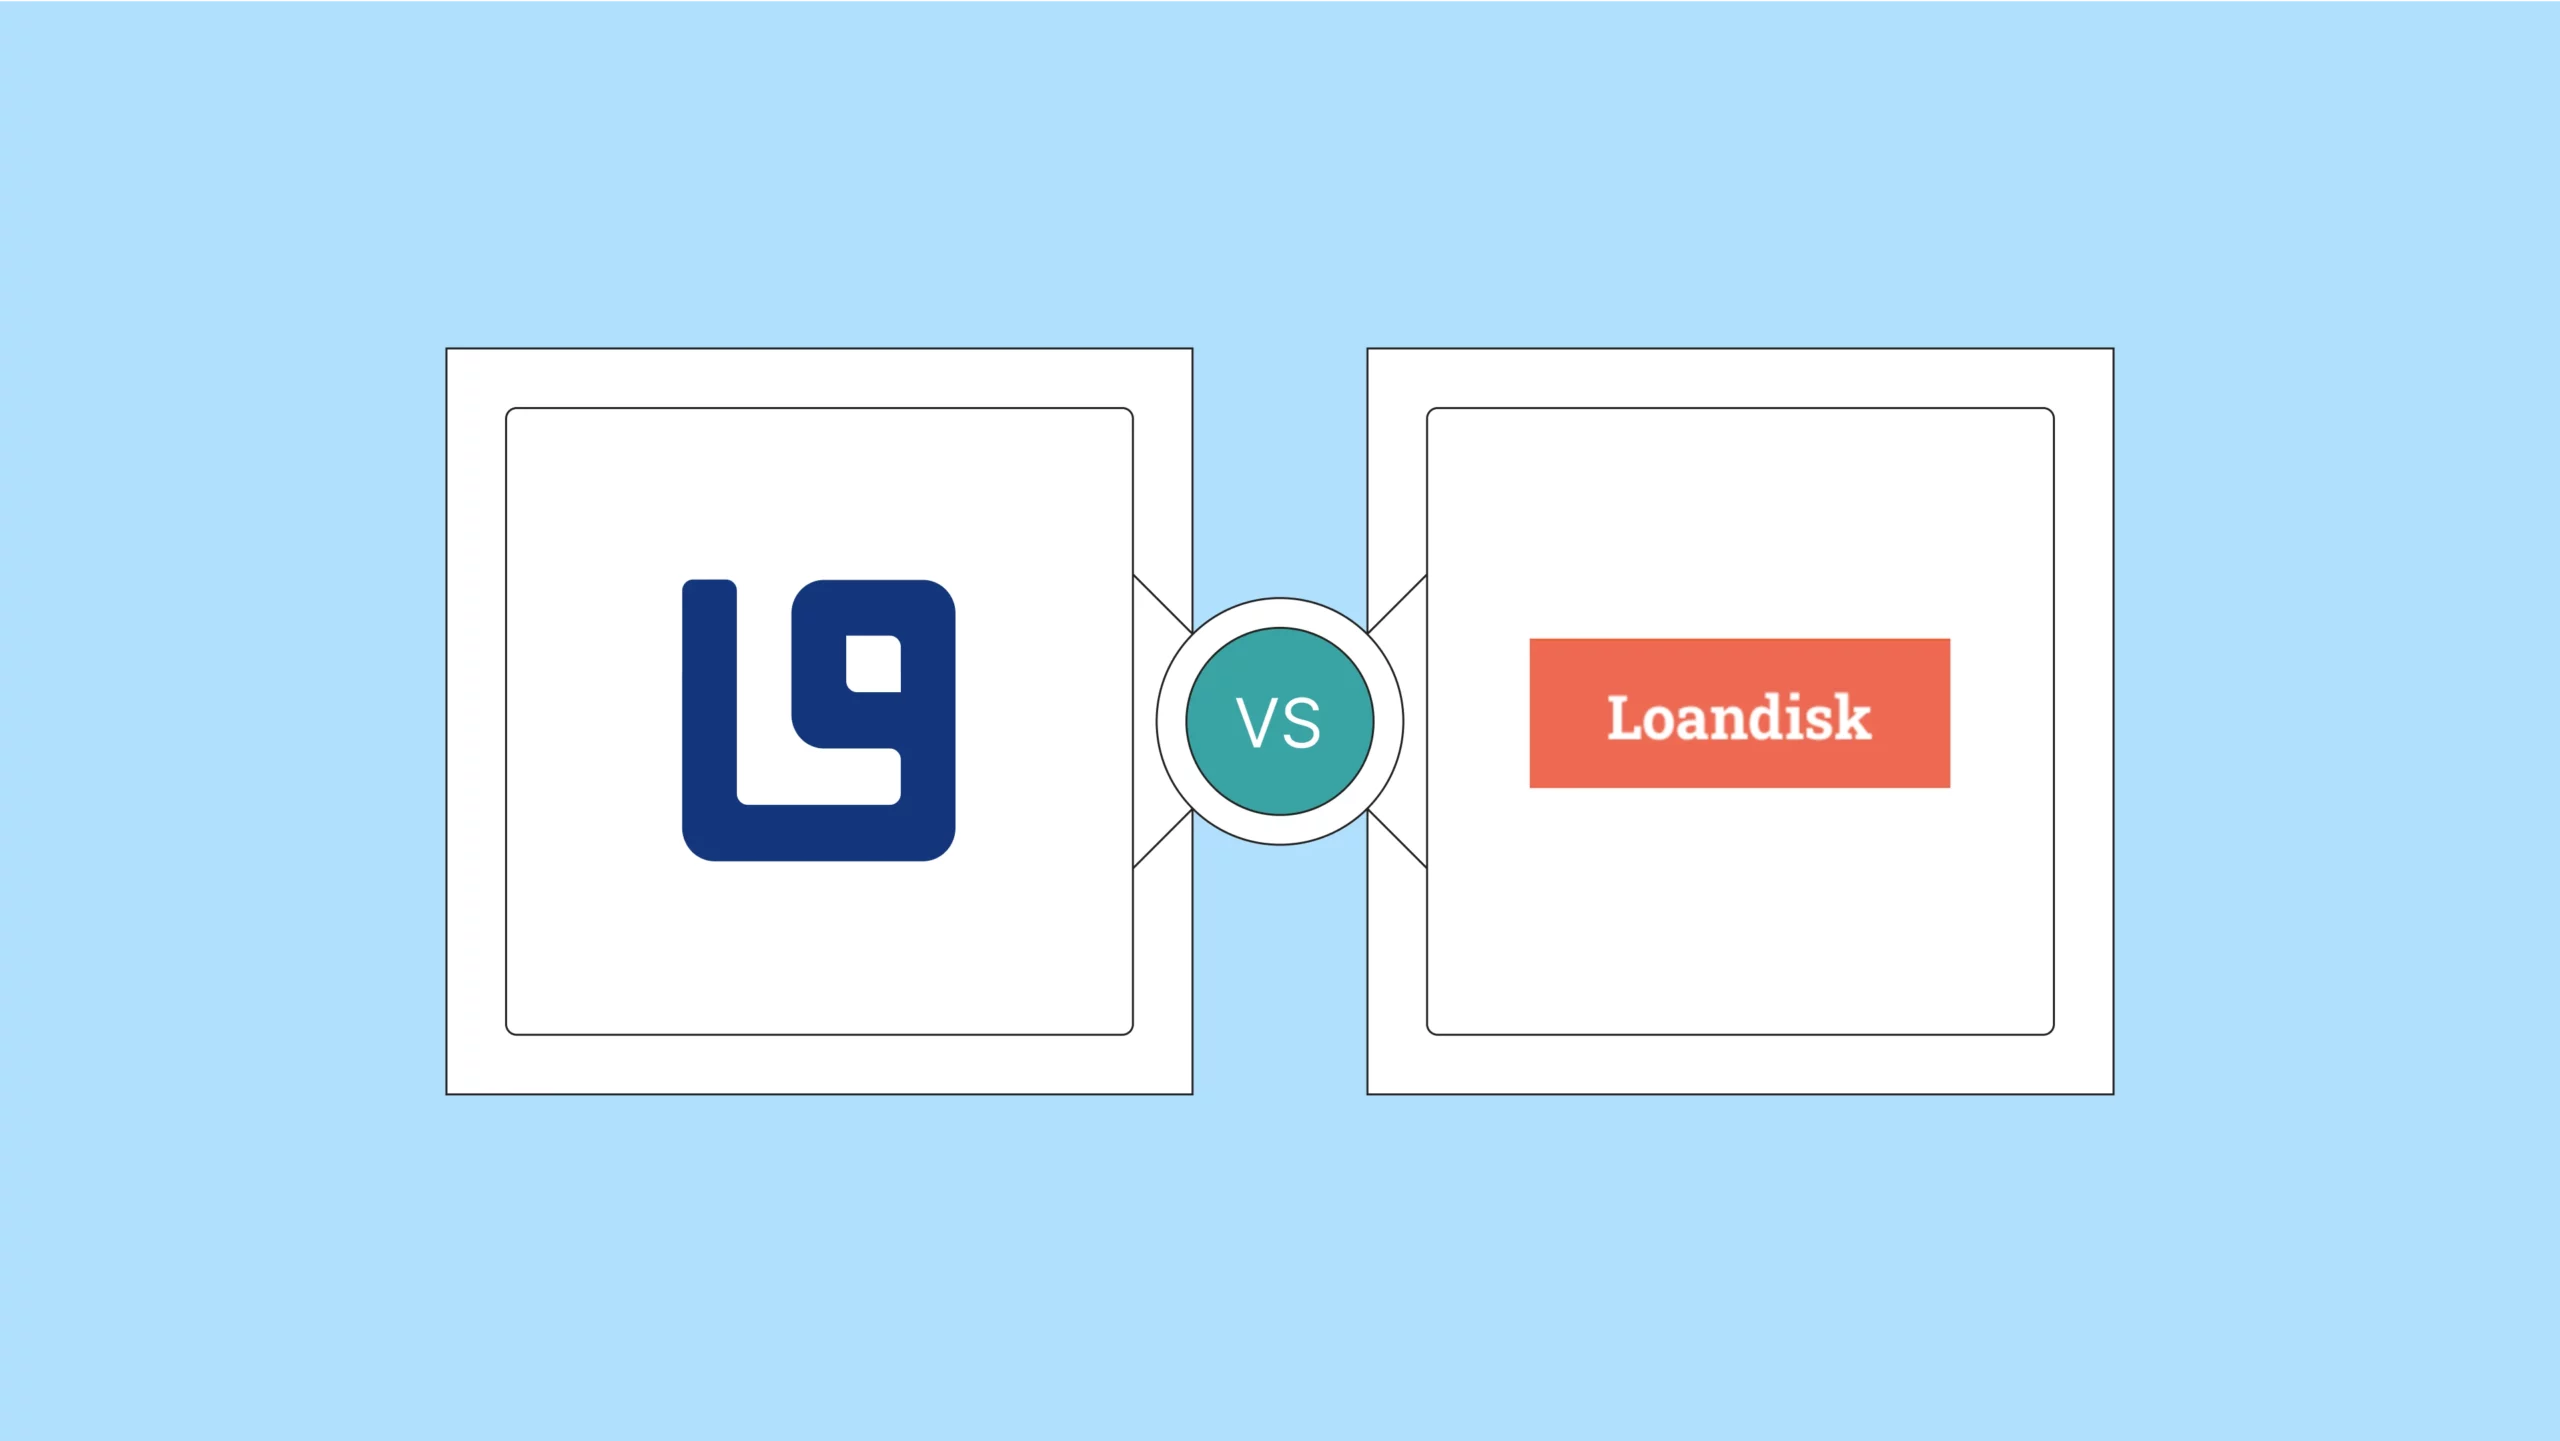 Lendsqr vs Loandisk: Which loan management software is right for you?